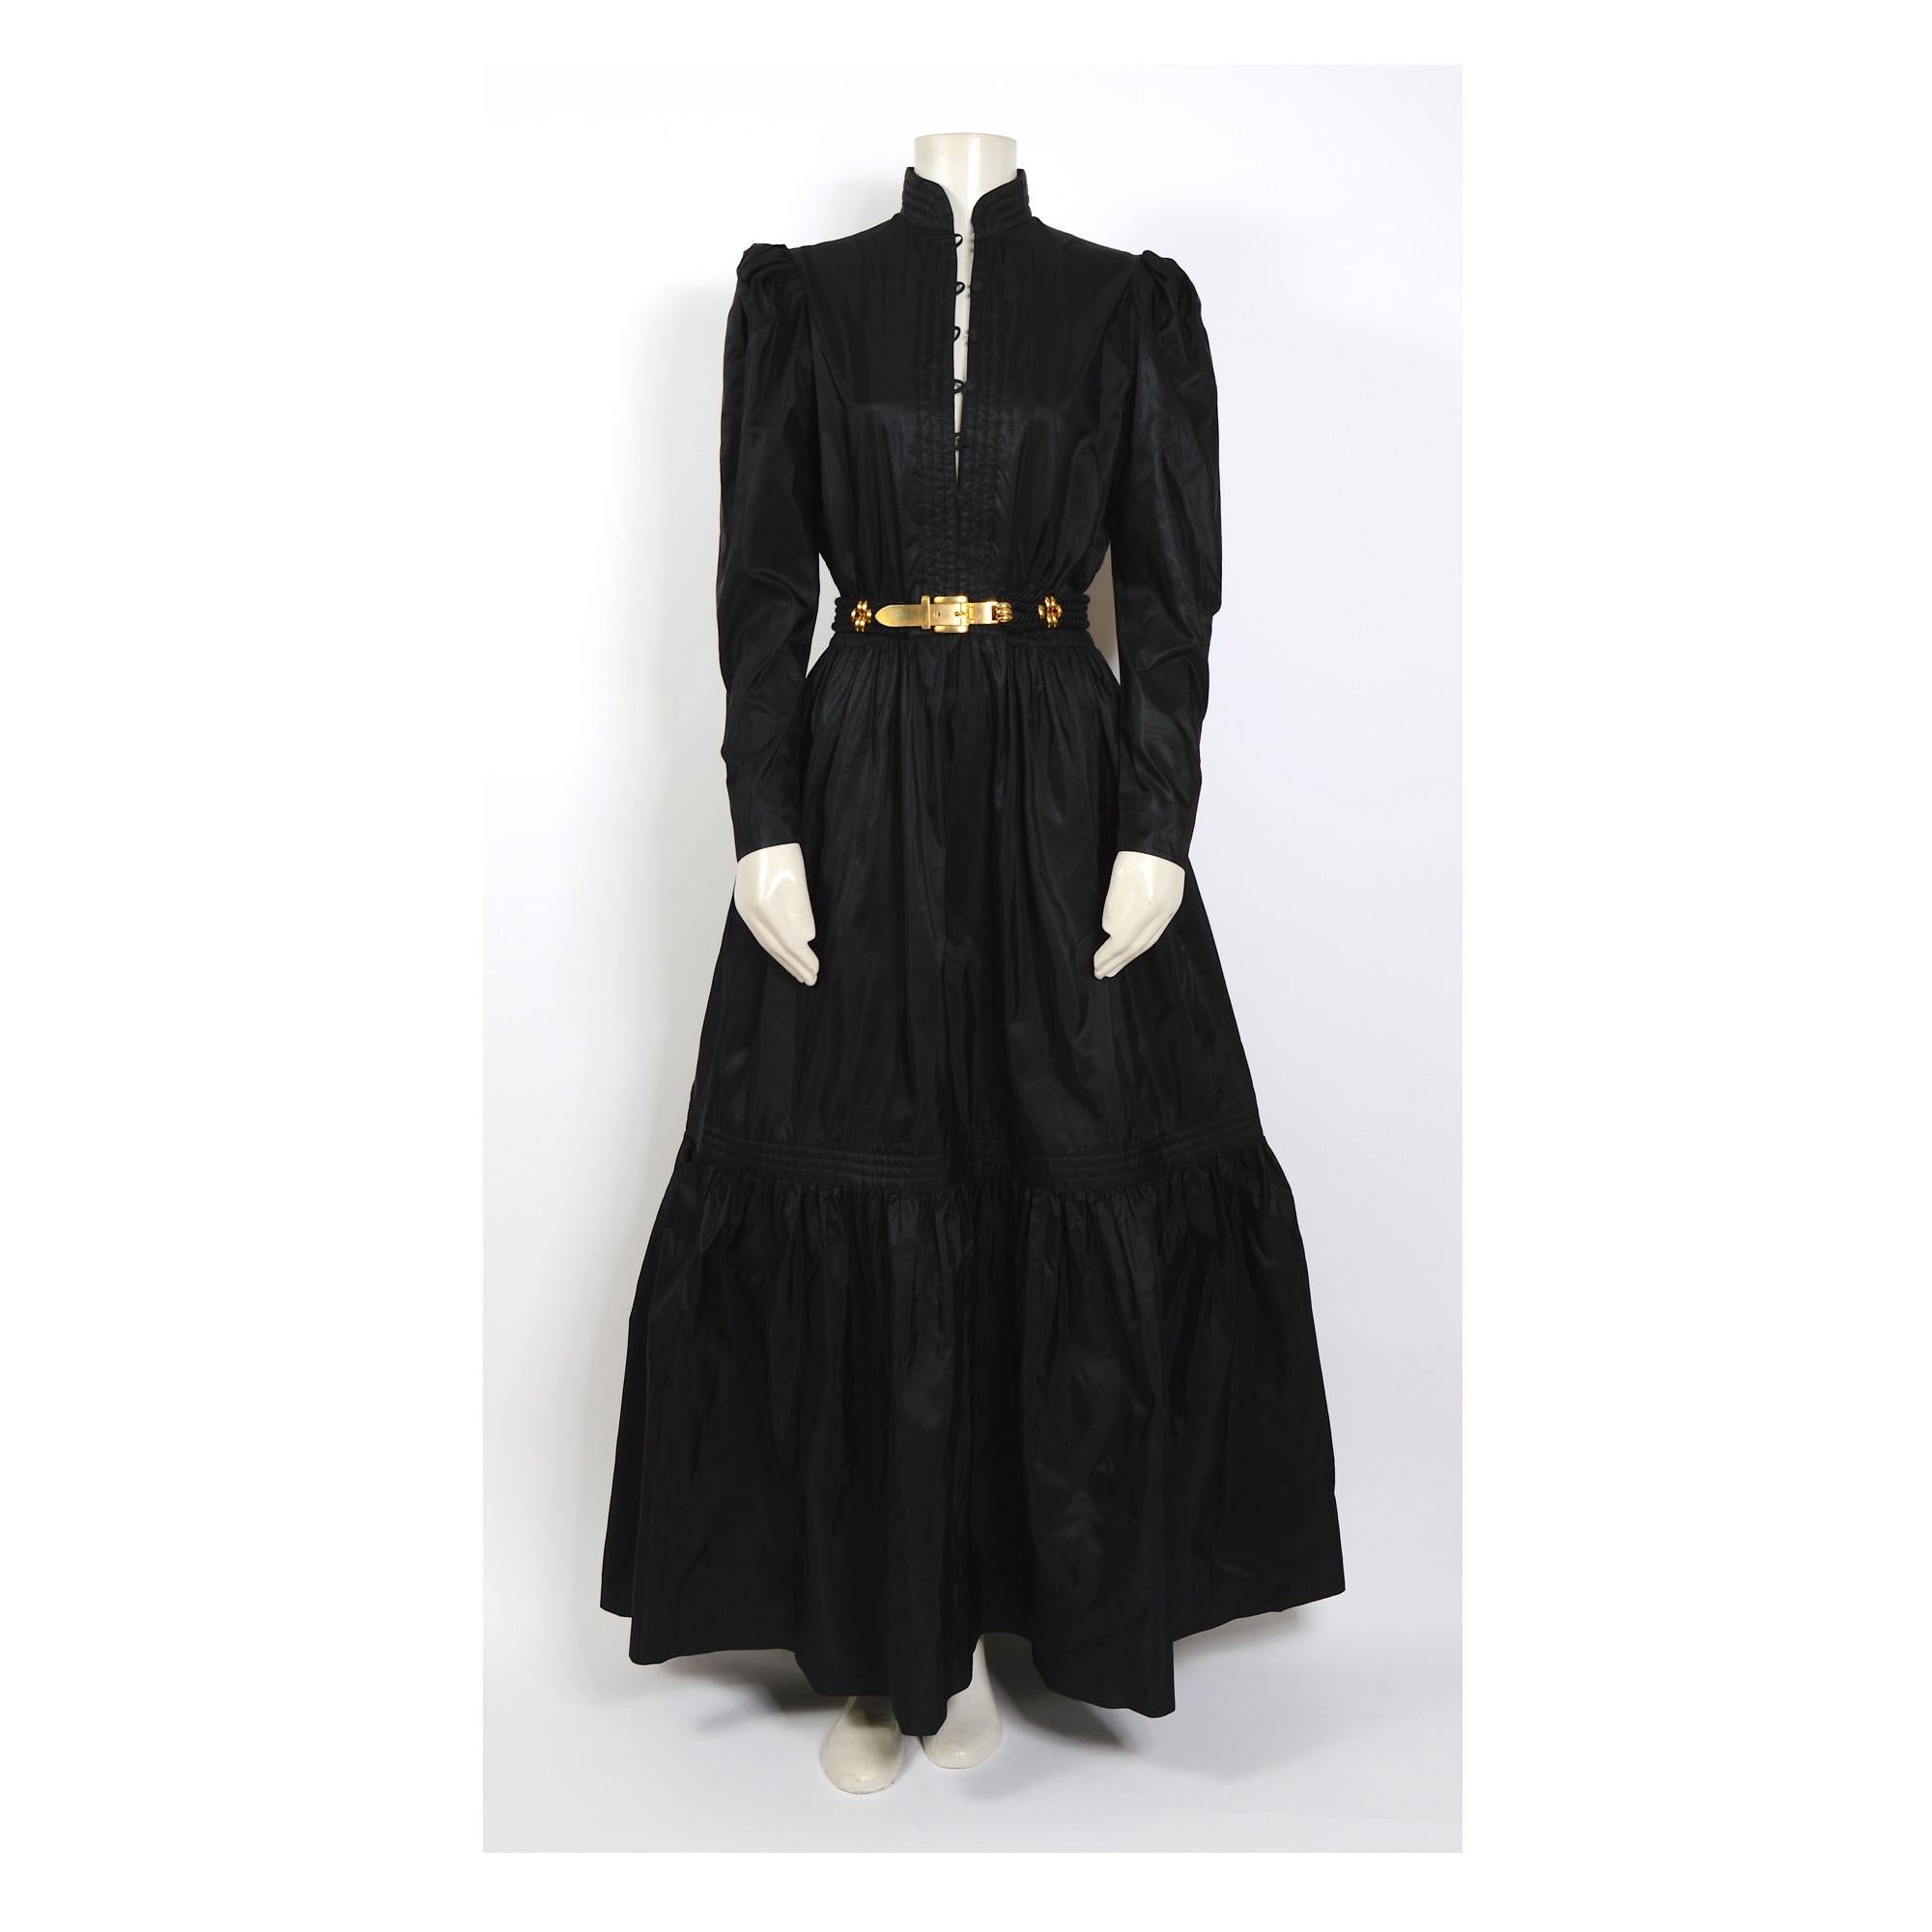 Vintage 1970s silk taffeta maxi boho dress by Guy Laroche Paris Boutique Collection comes with the original matching belt.
Label Size FR42 - GB 14 - US W12 J11 - 100silk - Made in France 
Measurements are taken flat: Sh to Sh 14,5inch/37cm - Ua to